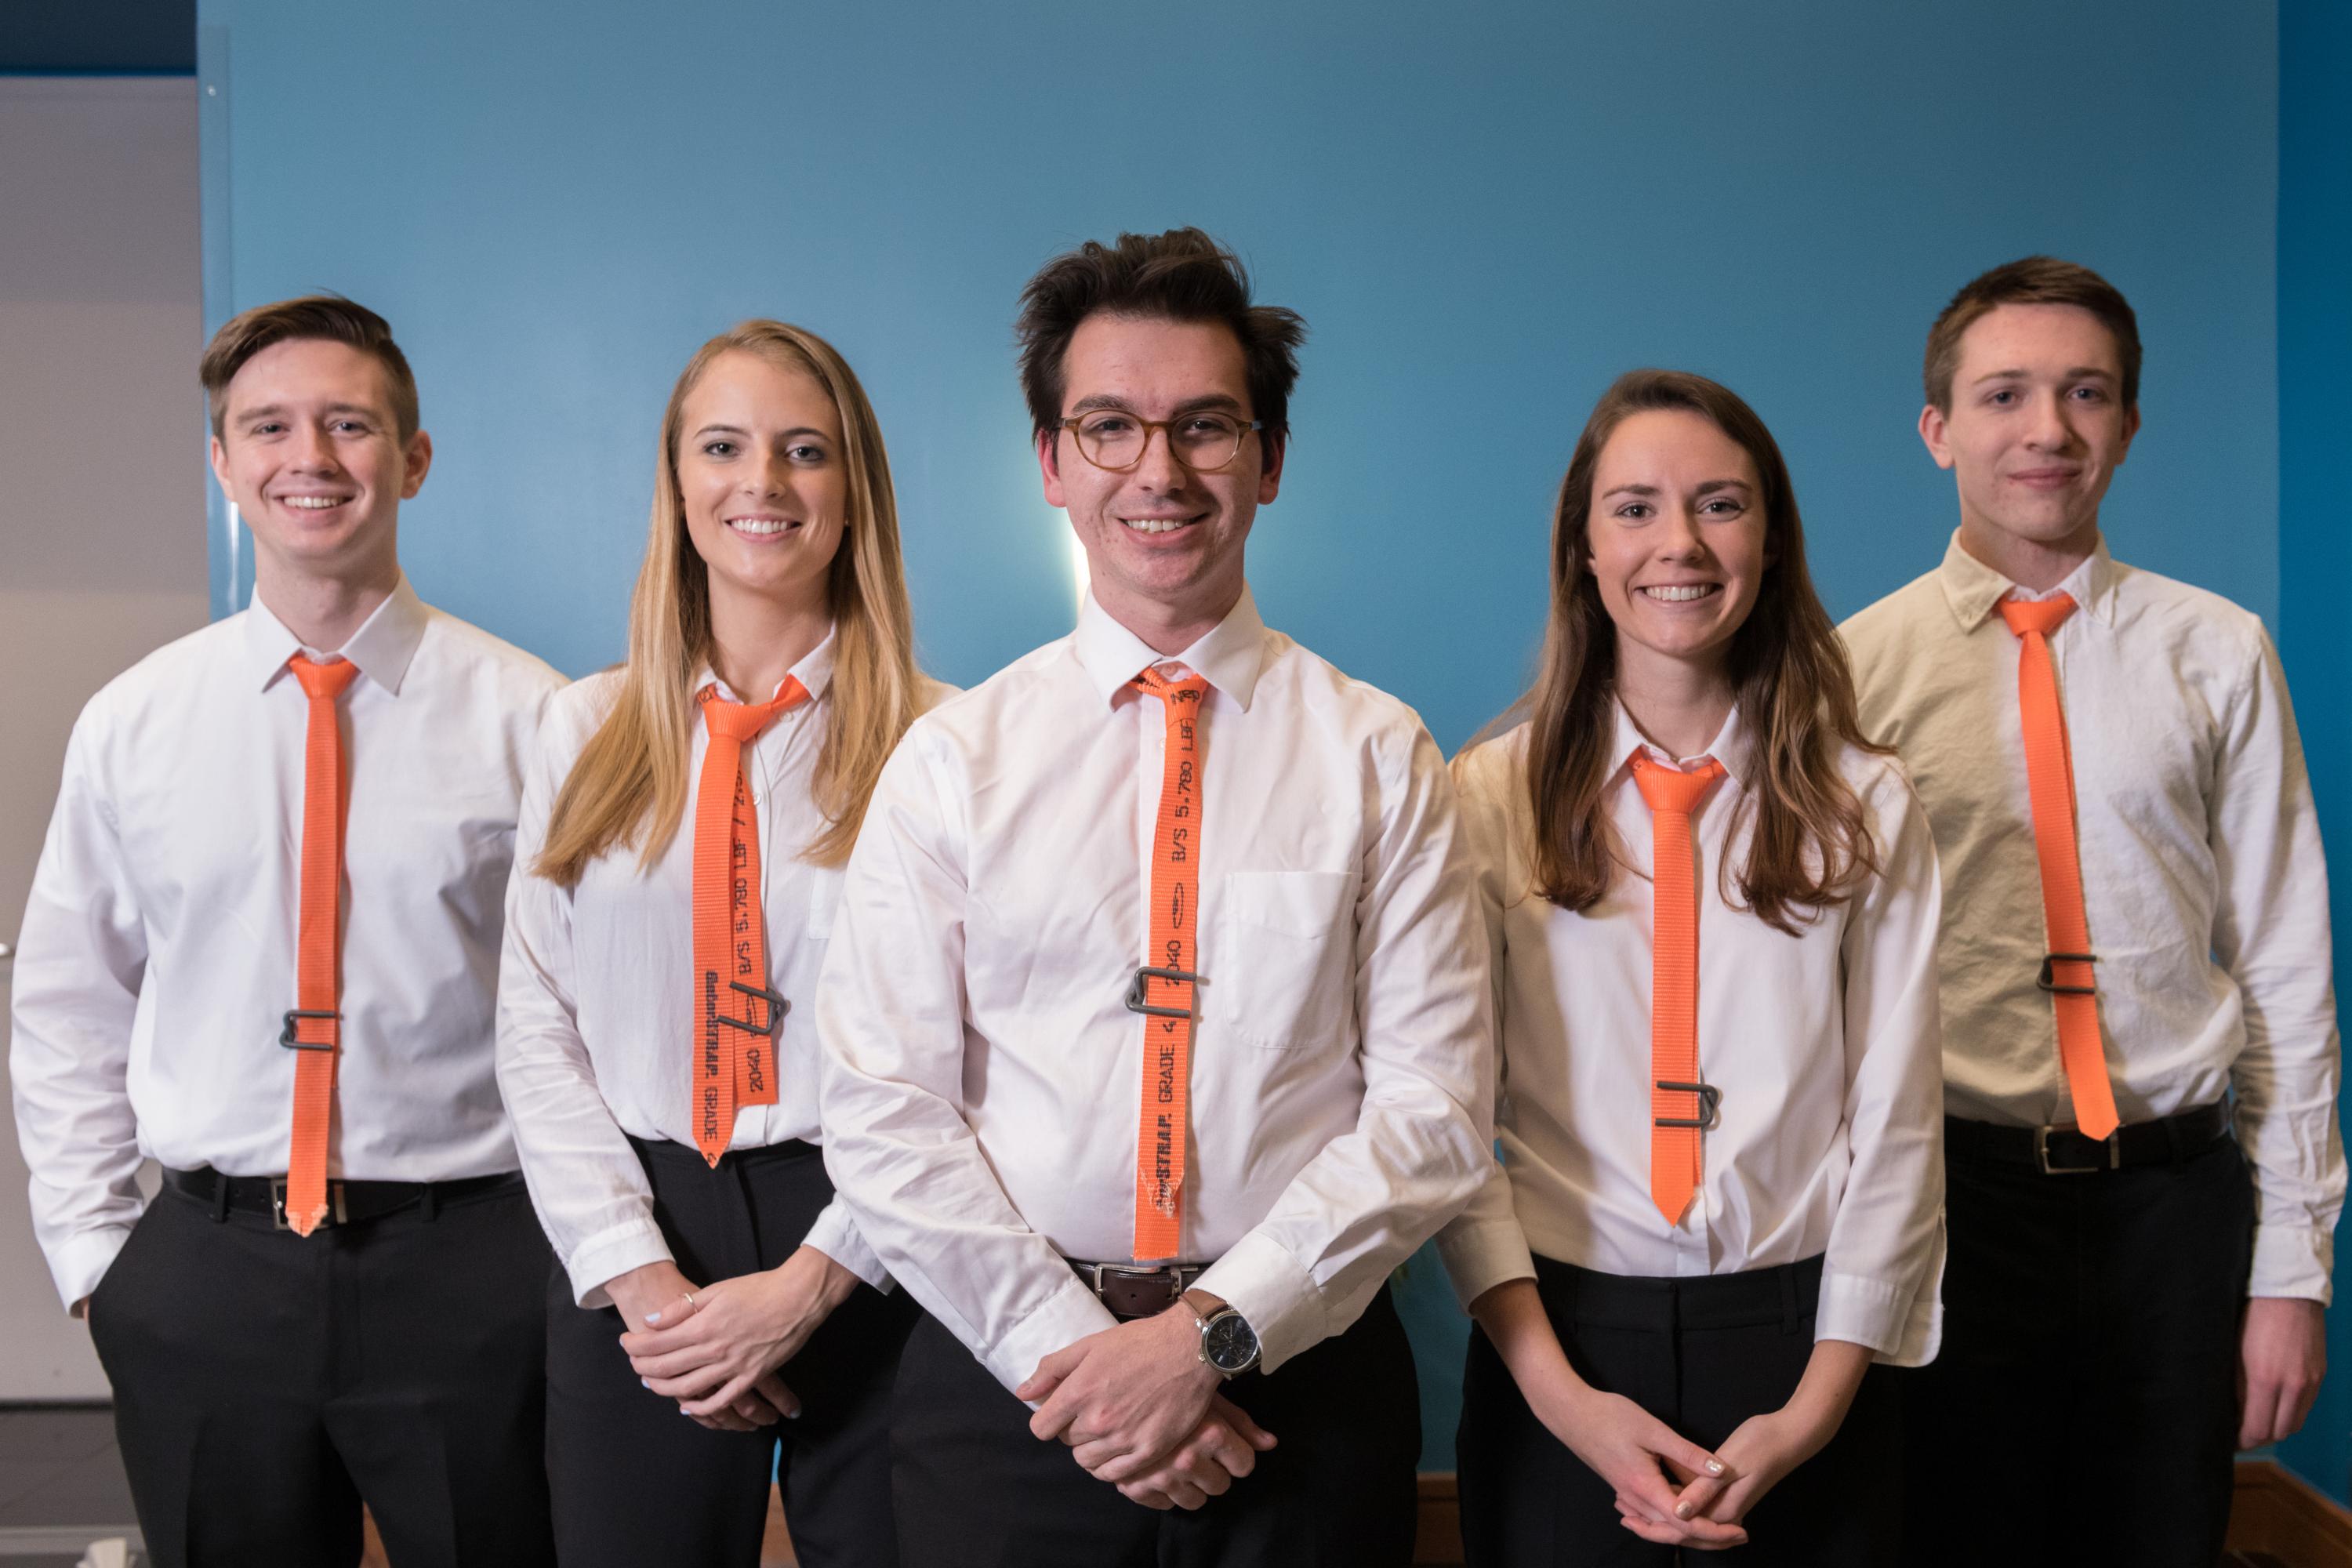 The InVenture Prize finalist created an easy, safe and effective strap tensioning tool for any shaped load. The inventors are recent mechanical engineering graduates: Michael Bailey, Lauren Perrine, Austin Forgey, Hannah and Brandon Will. (Photo by Allison Carter)